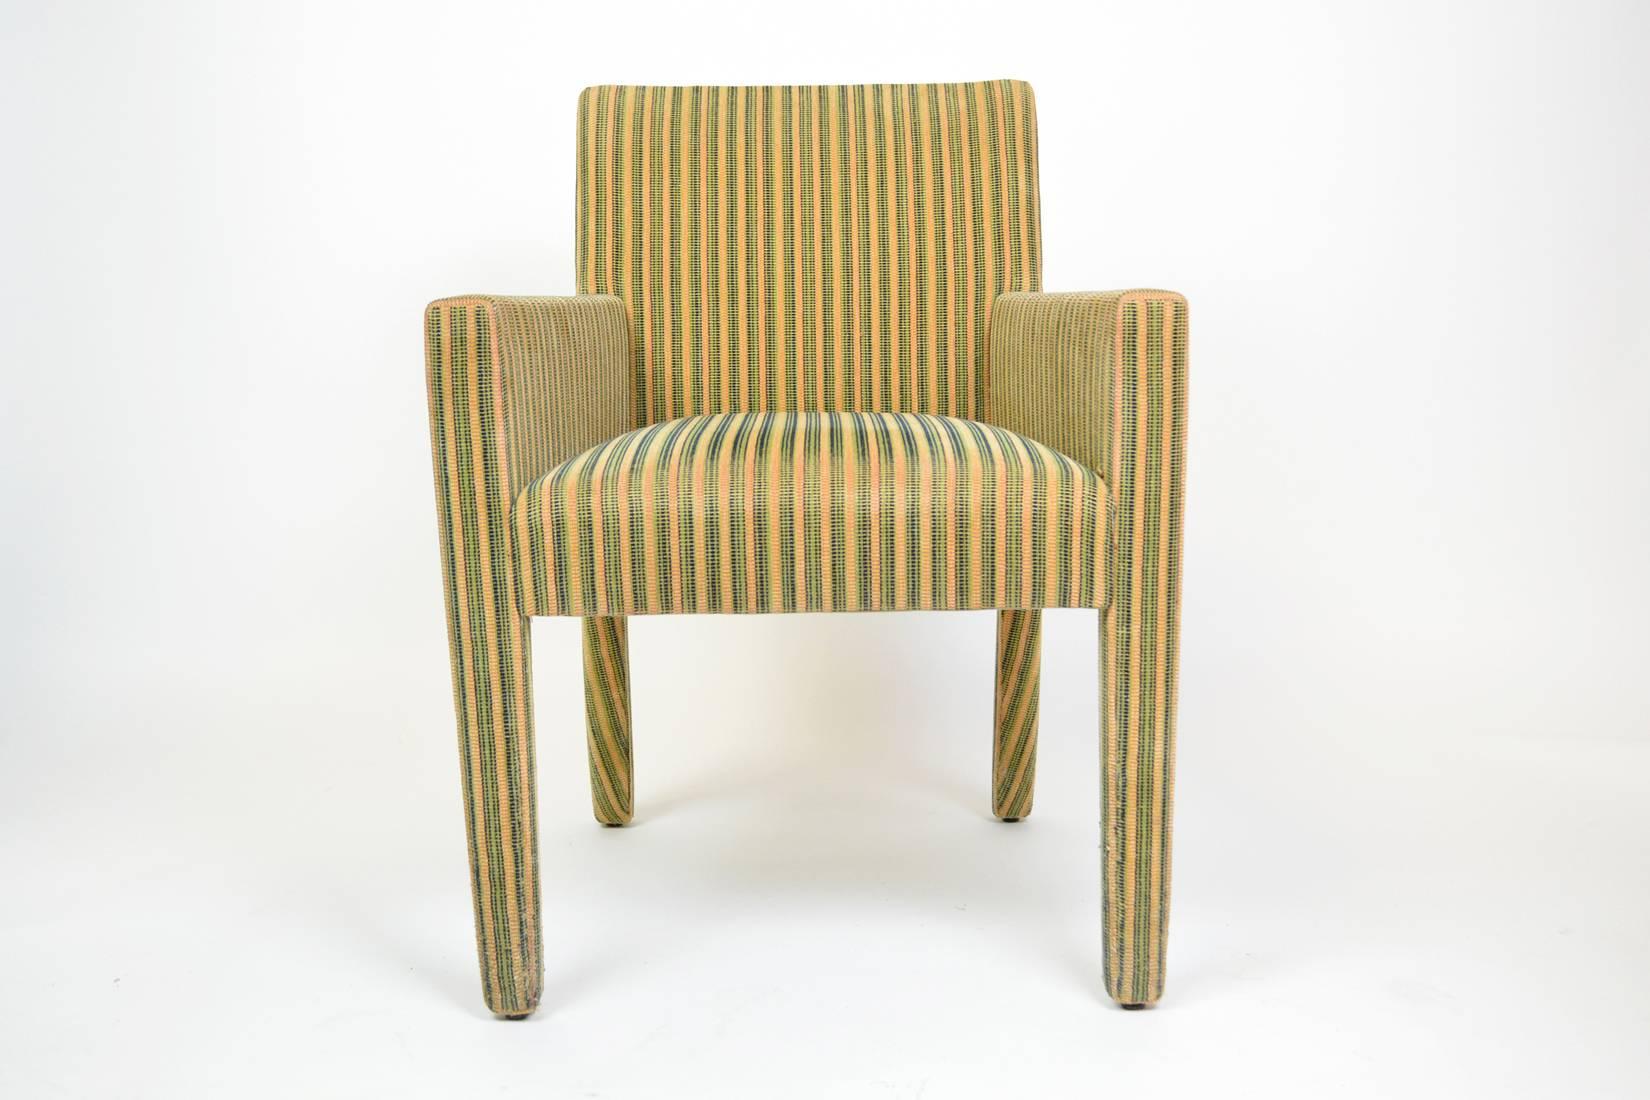 Six fully upholstered armchairs by J. Robert Scott in the style of Jean Michel Frank, circa 1980s. Upholstery is original with pulls and wear at corners. Two chairs need to be tightened. 
Sold as a pair of chairs. Three sets available.

Measures: